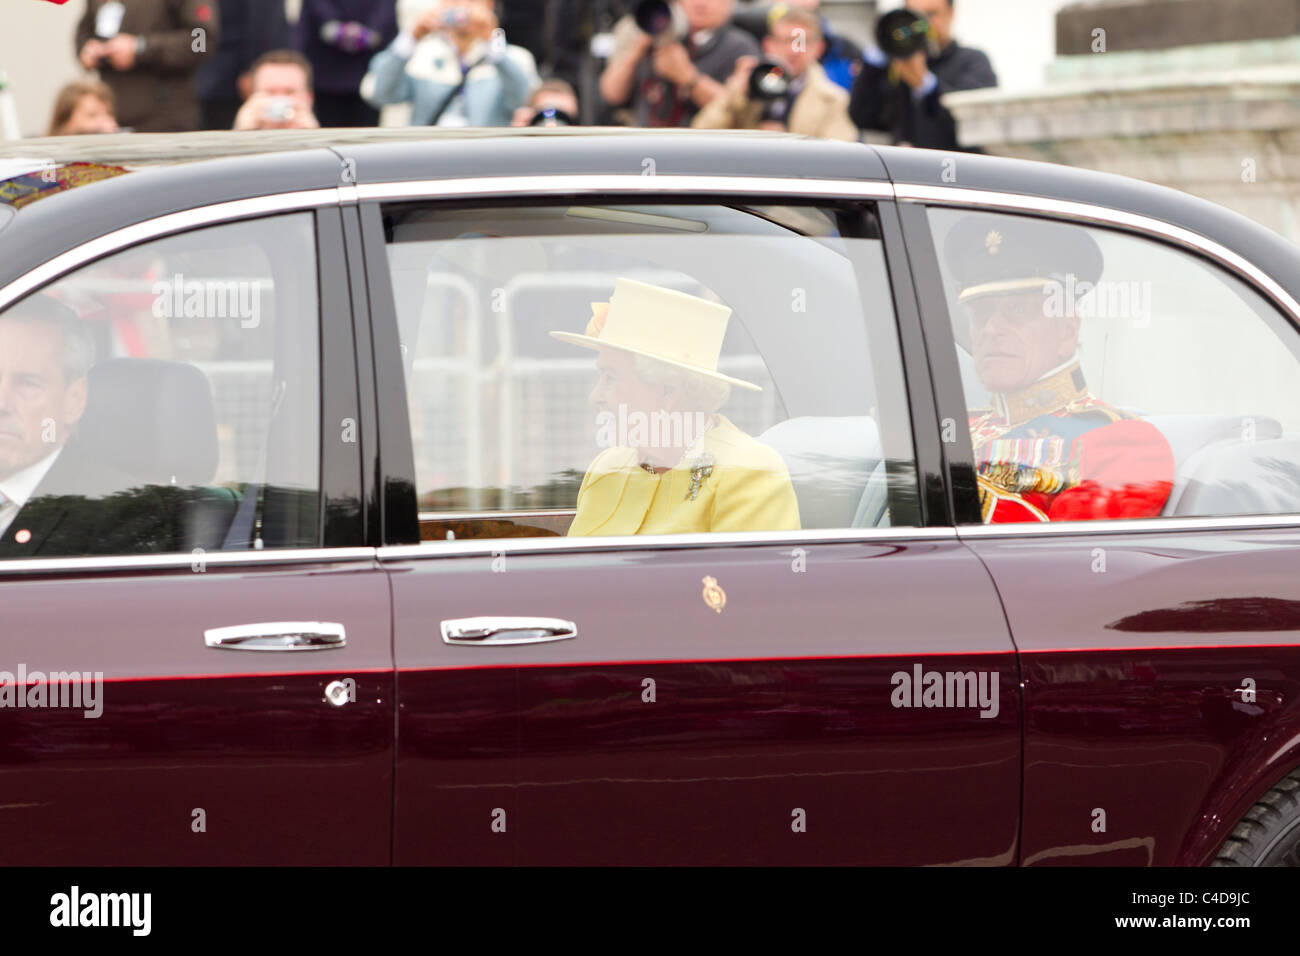 The Queen and Prince Philip leave Buckingham Palace  for the wedding of Prince William and Kate Middleton, April 29, 2011 Stock Photo